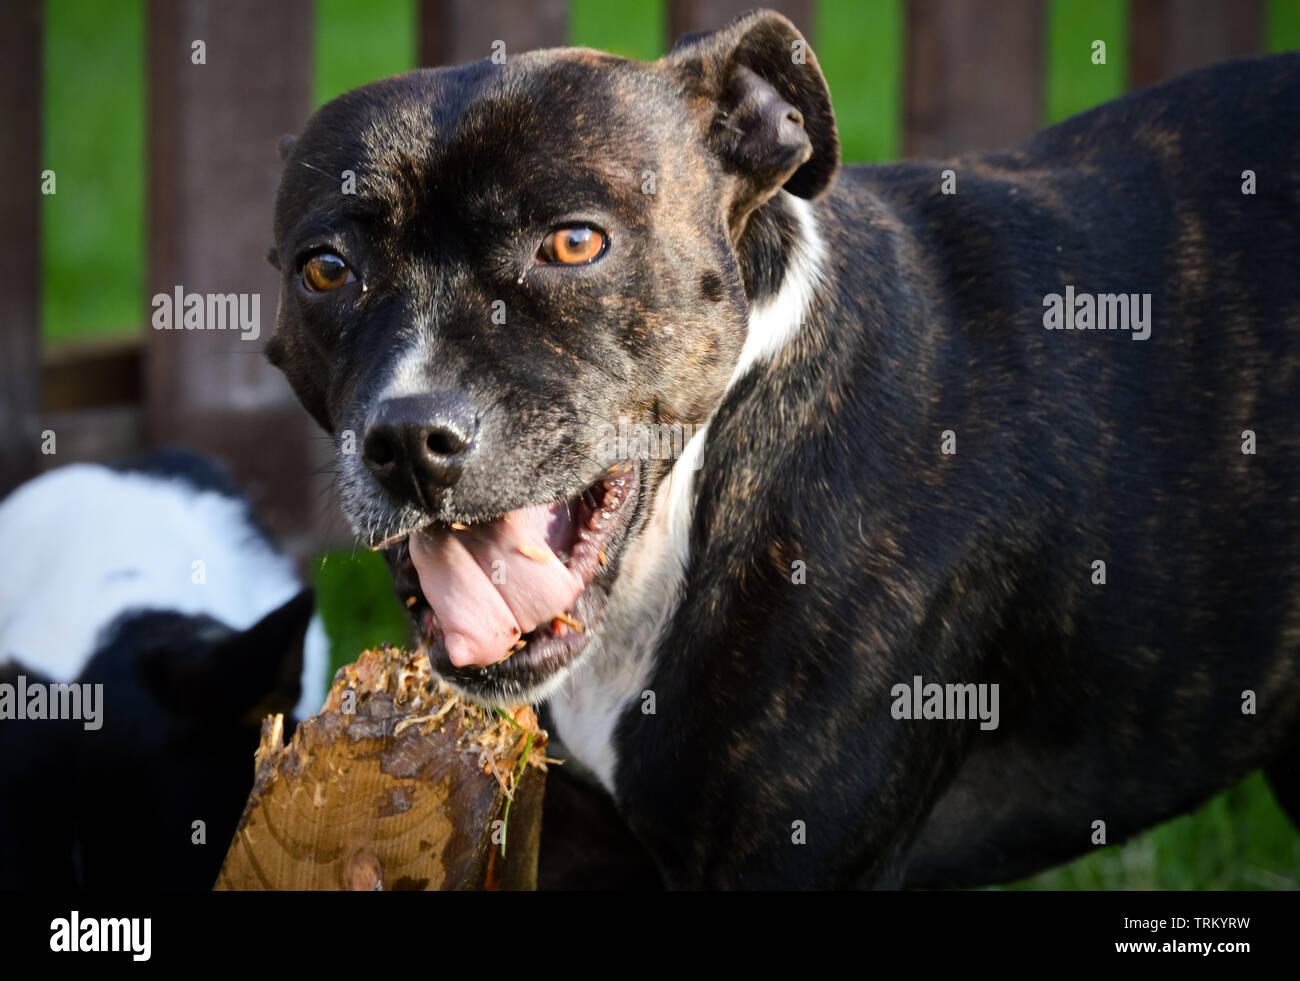 Staffordshire Bull Terrier dog chewing a piece of wood that she shouldn't be! Stock Photo